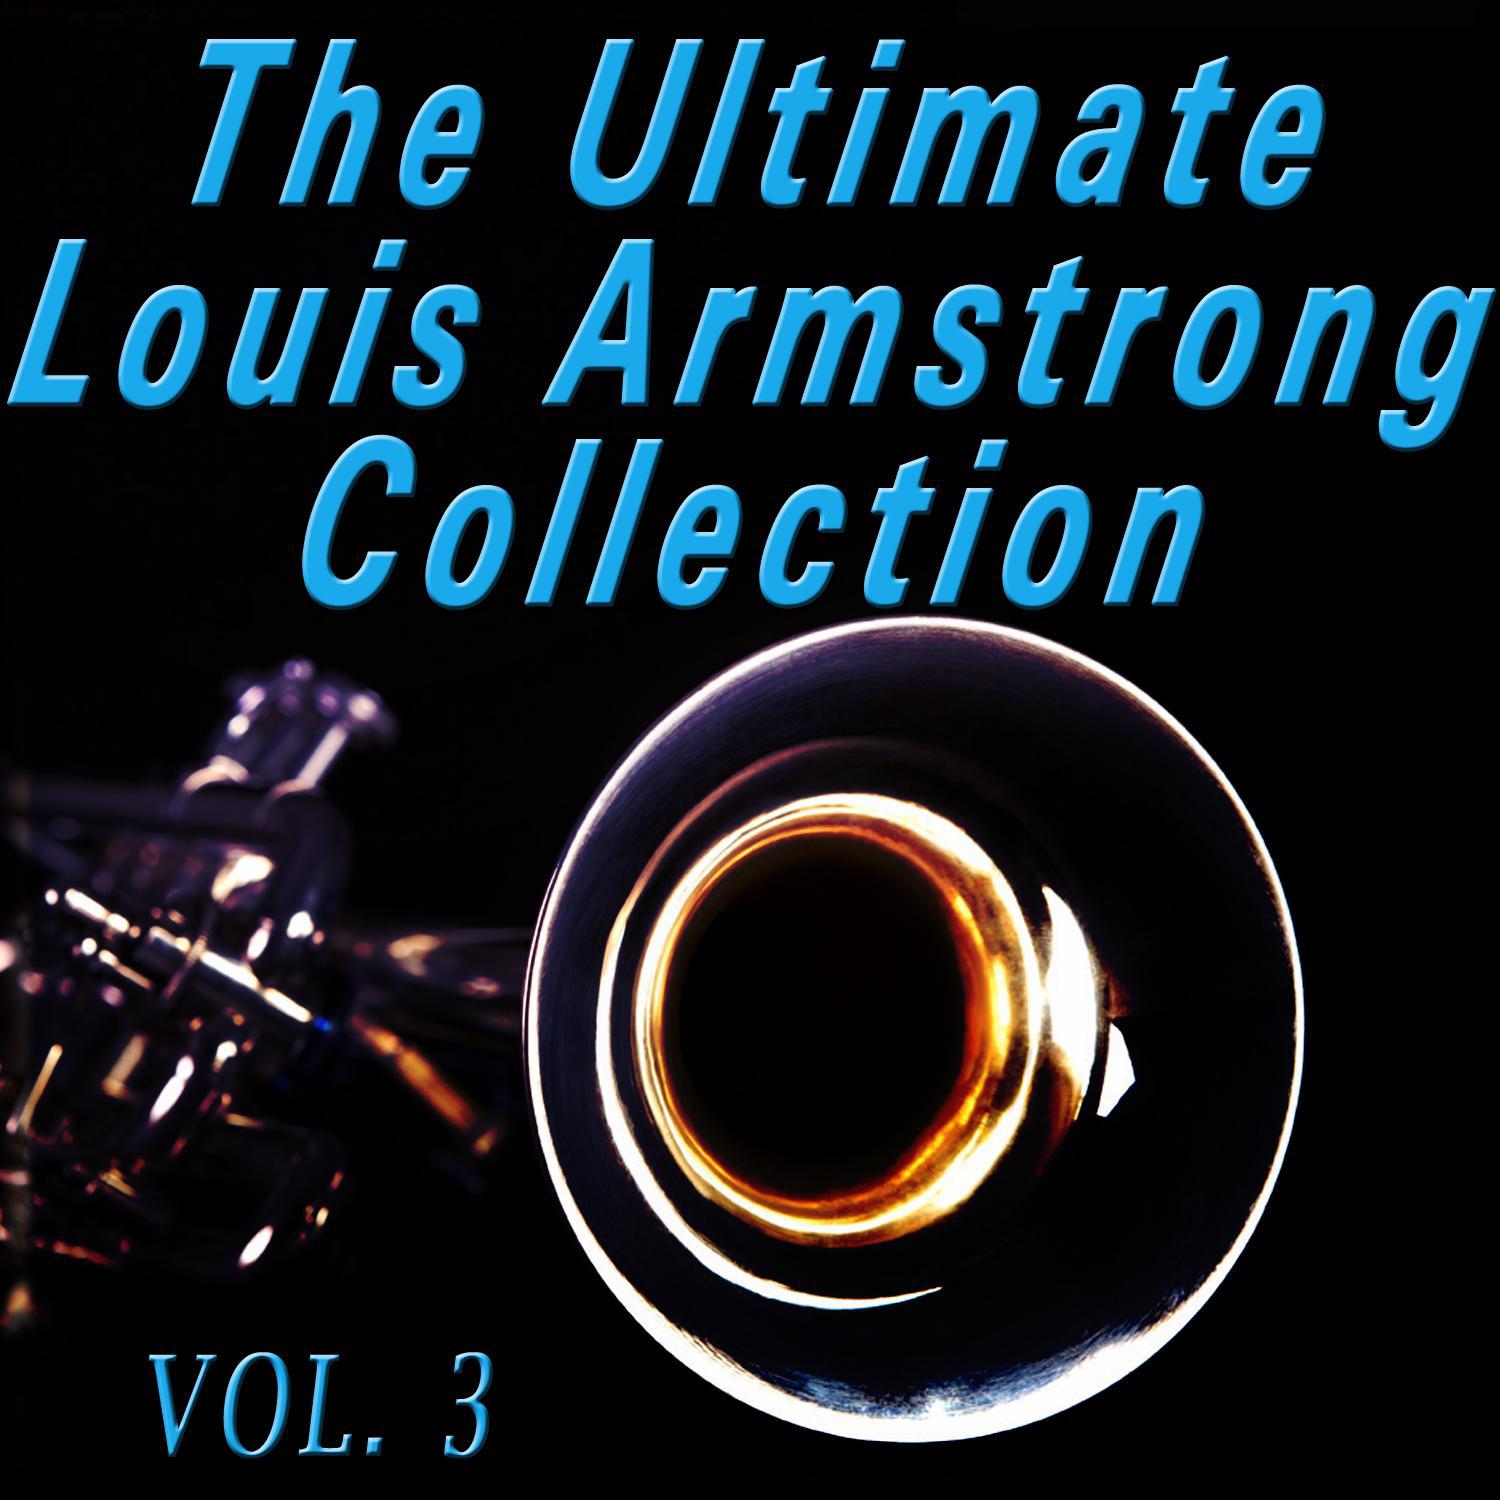 The Ultimate Louis Armstrong Collection, Vol. 3专辑